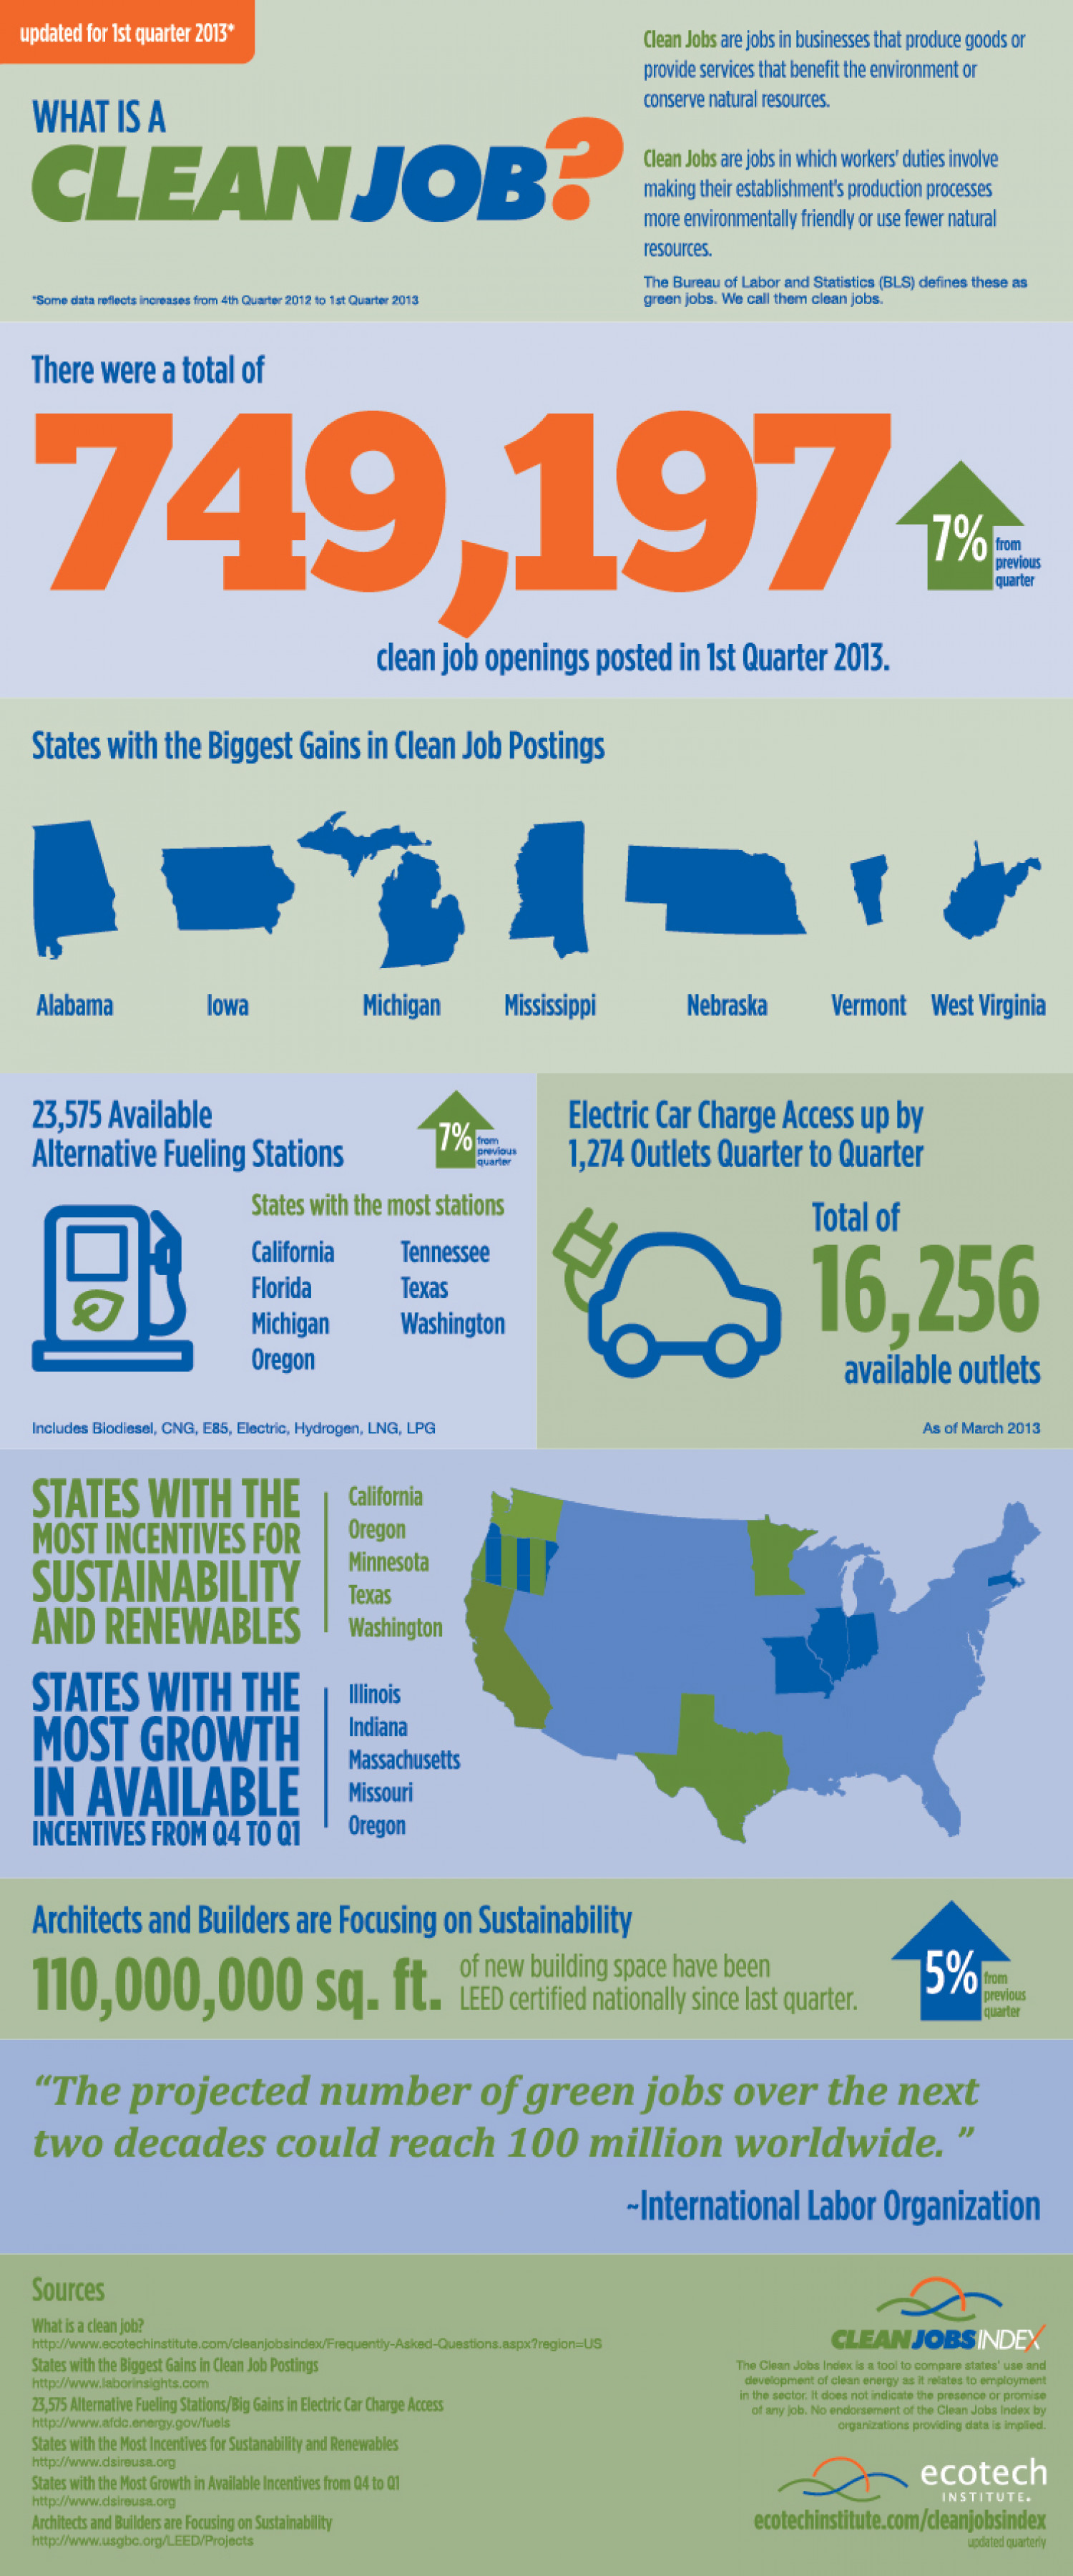 Clean Jobs Index Shows the U.S. Had Nearly 750,000 Clean Job Openings in First Quarter of 2013 Infographic